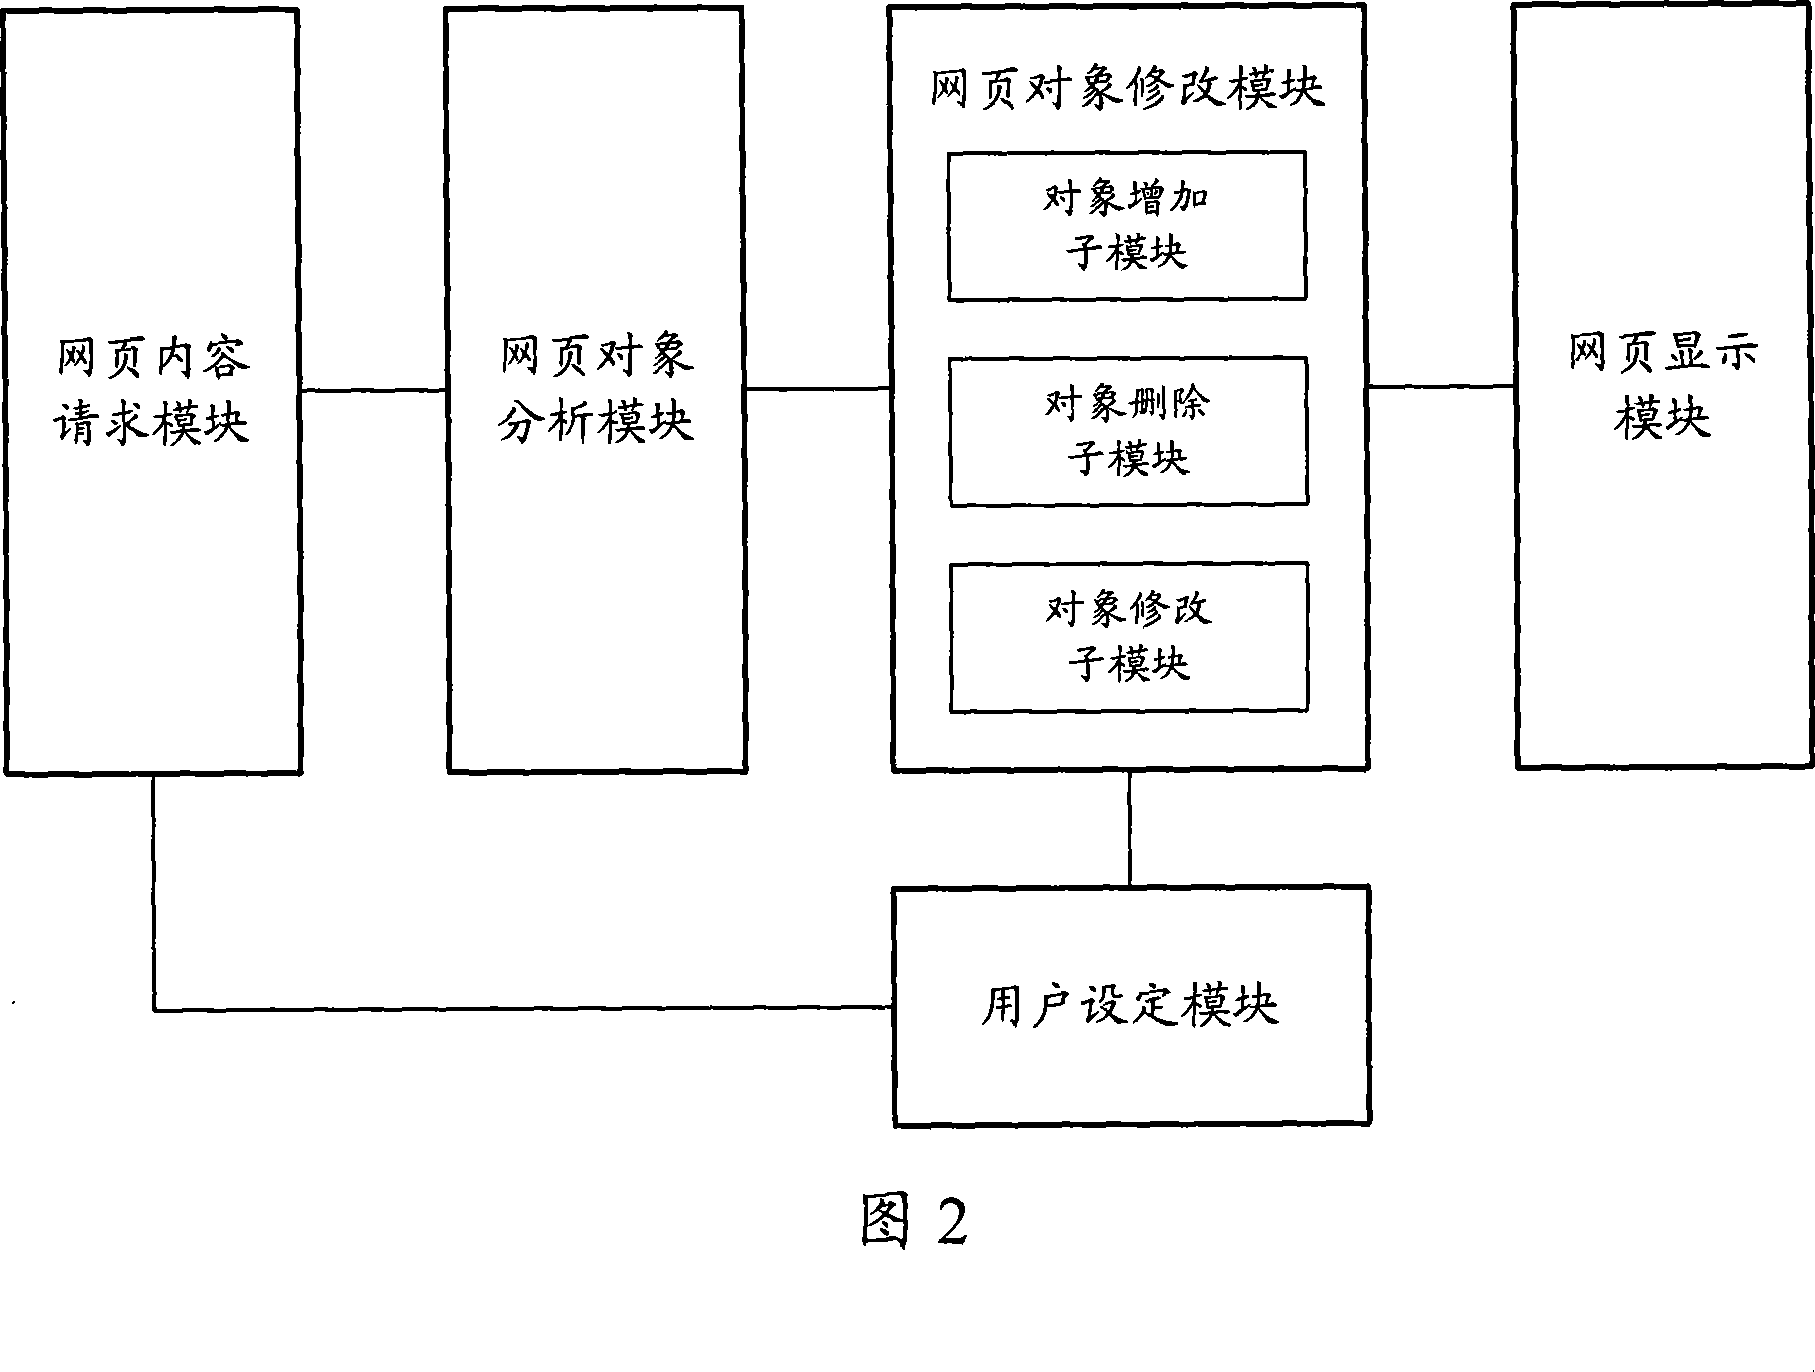 Method and system for adjusting web page display contents on client terminal